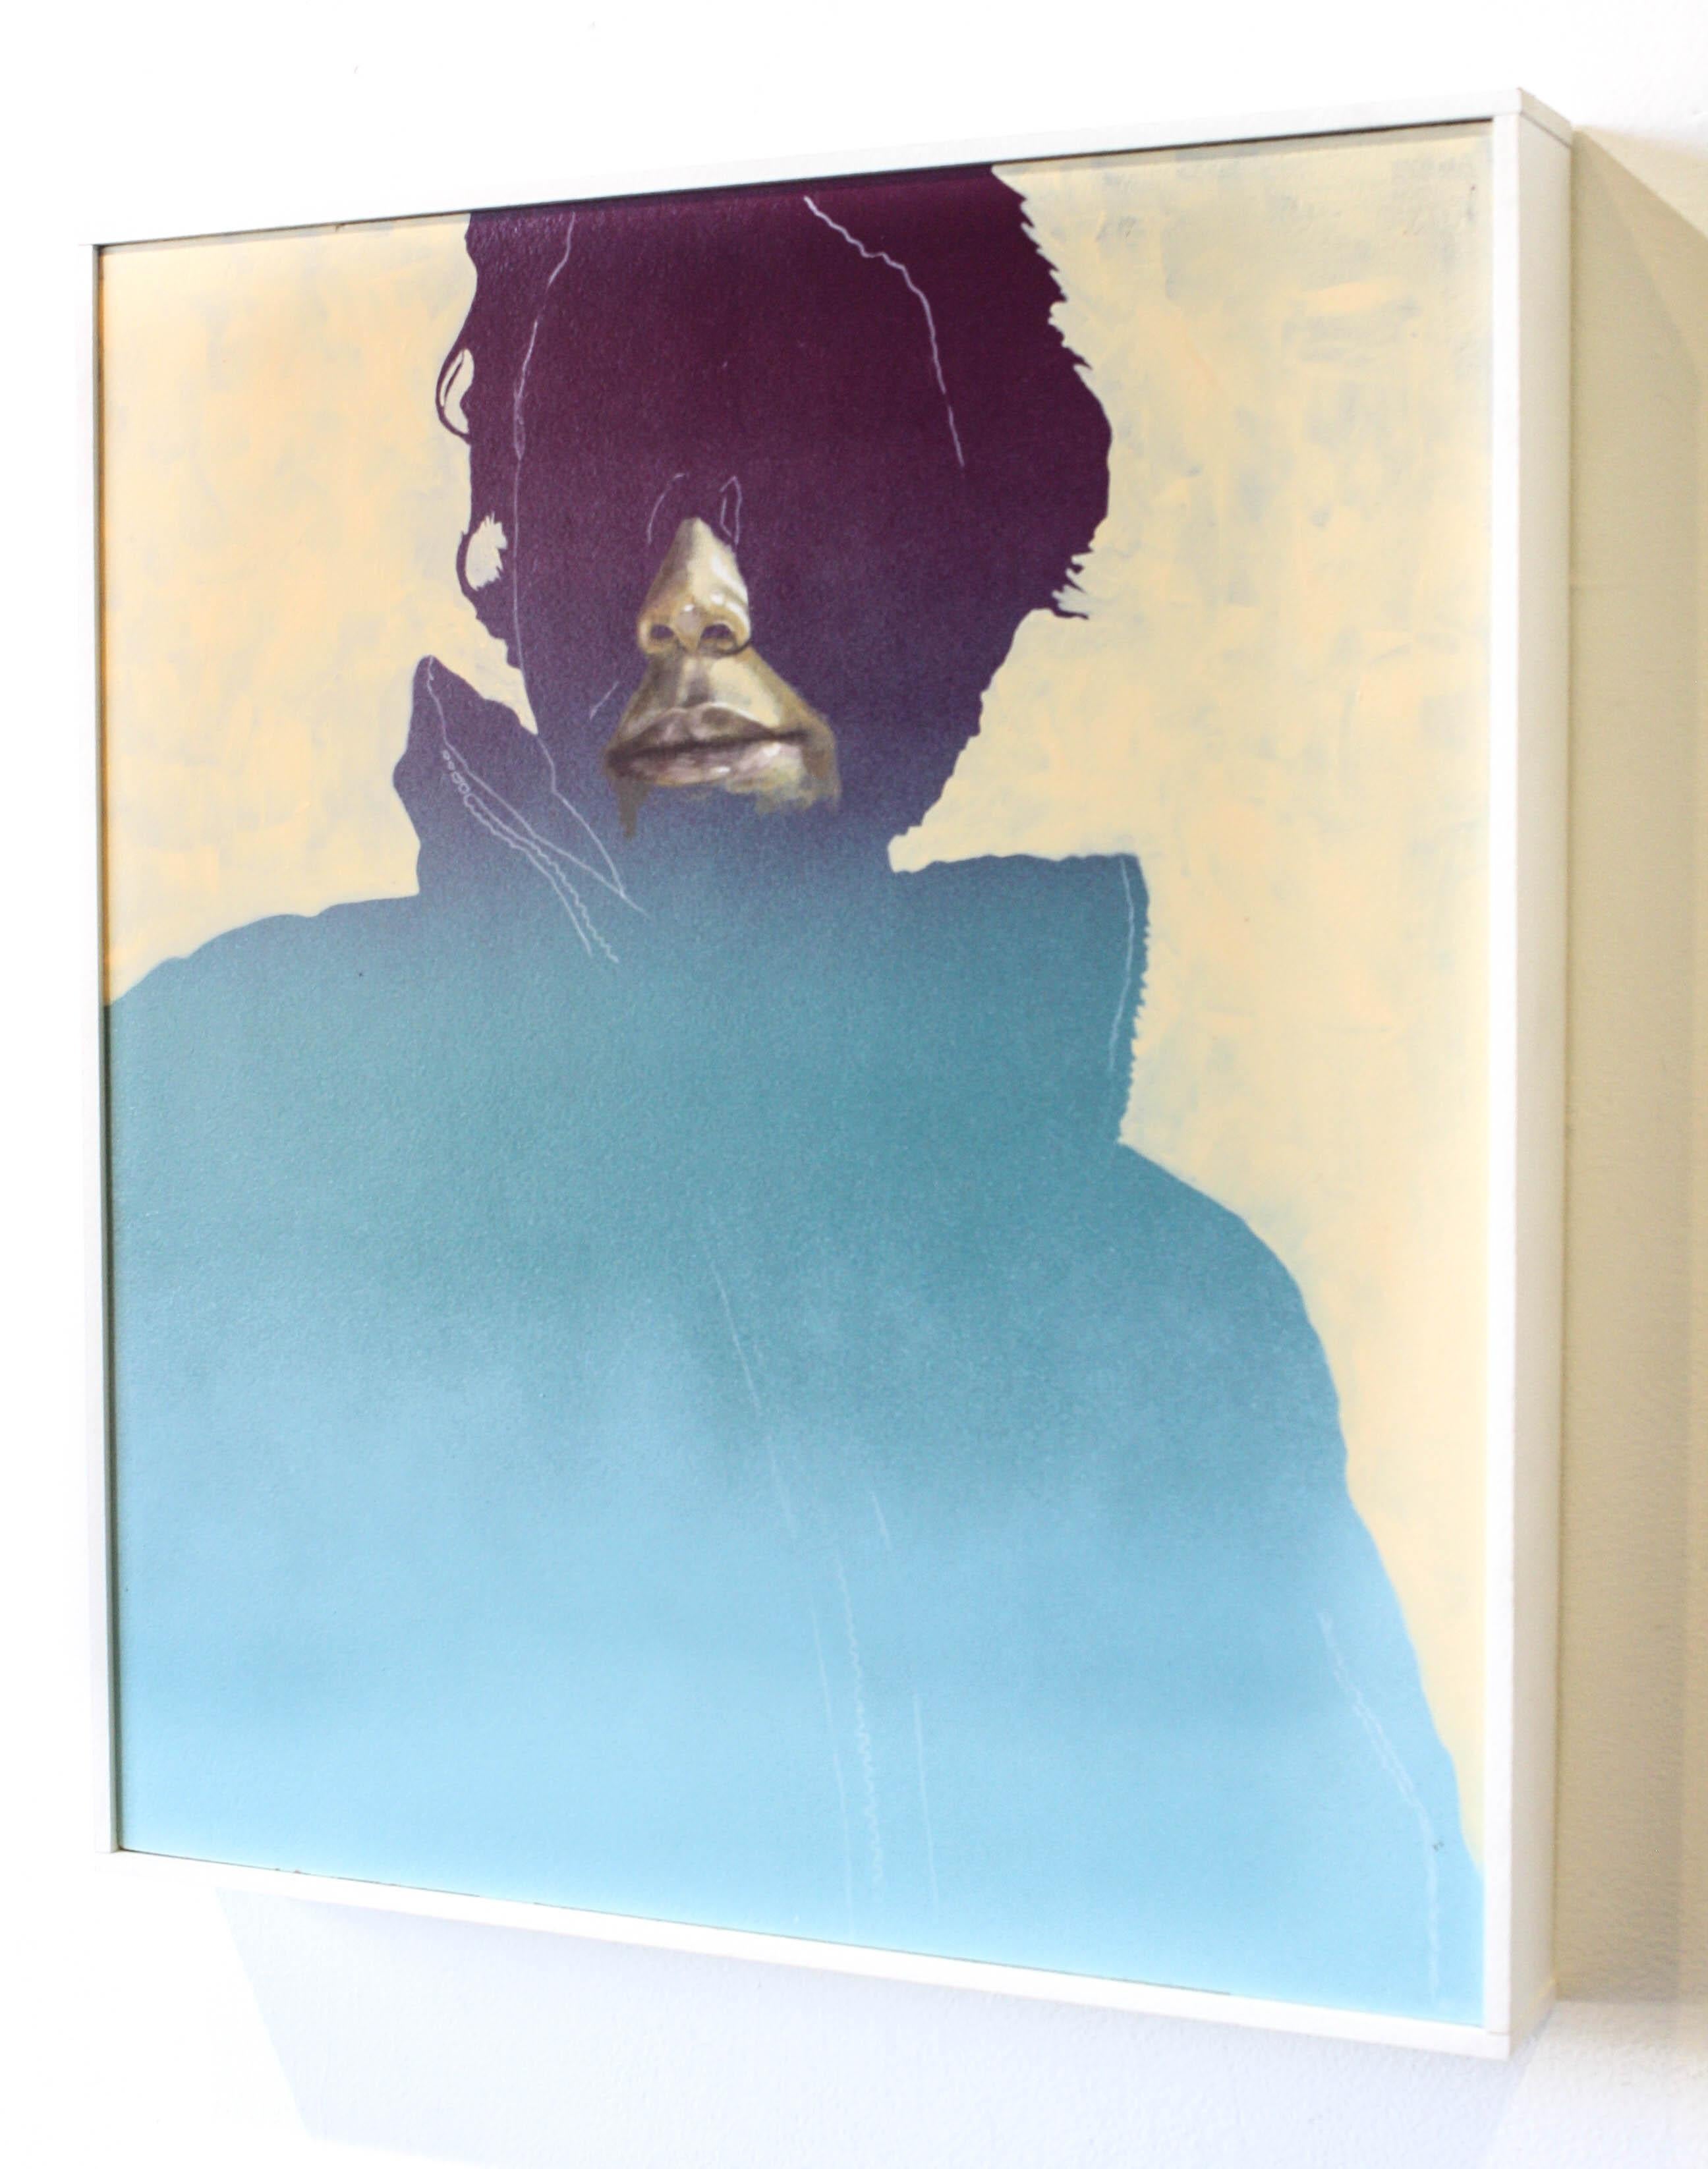 Untitled Portrait #1 - Blue Figurative Painting by Nick Stull